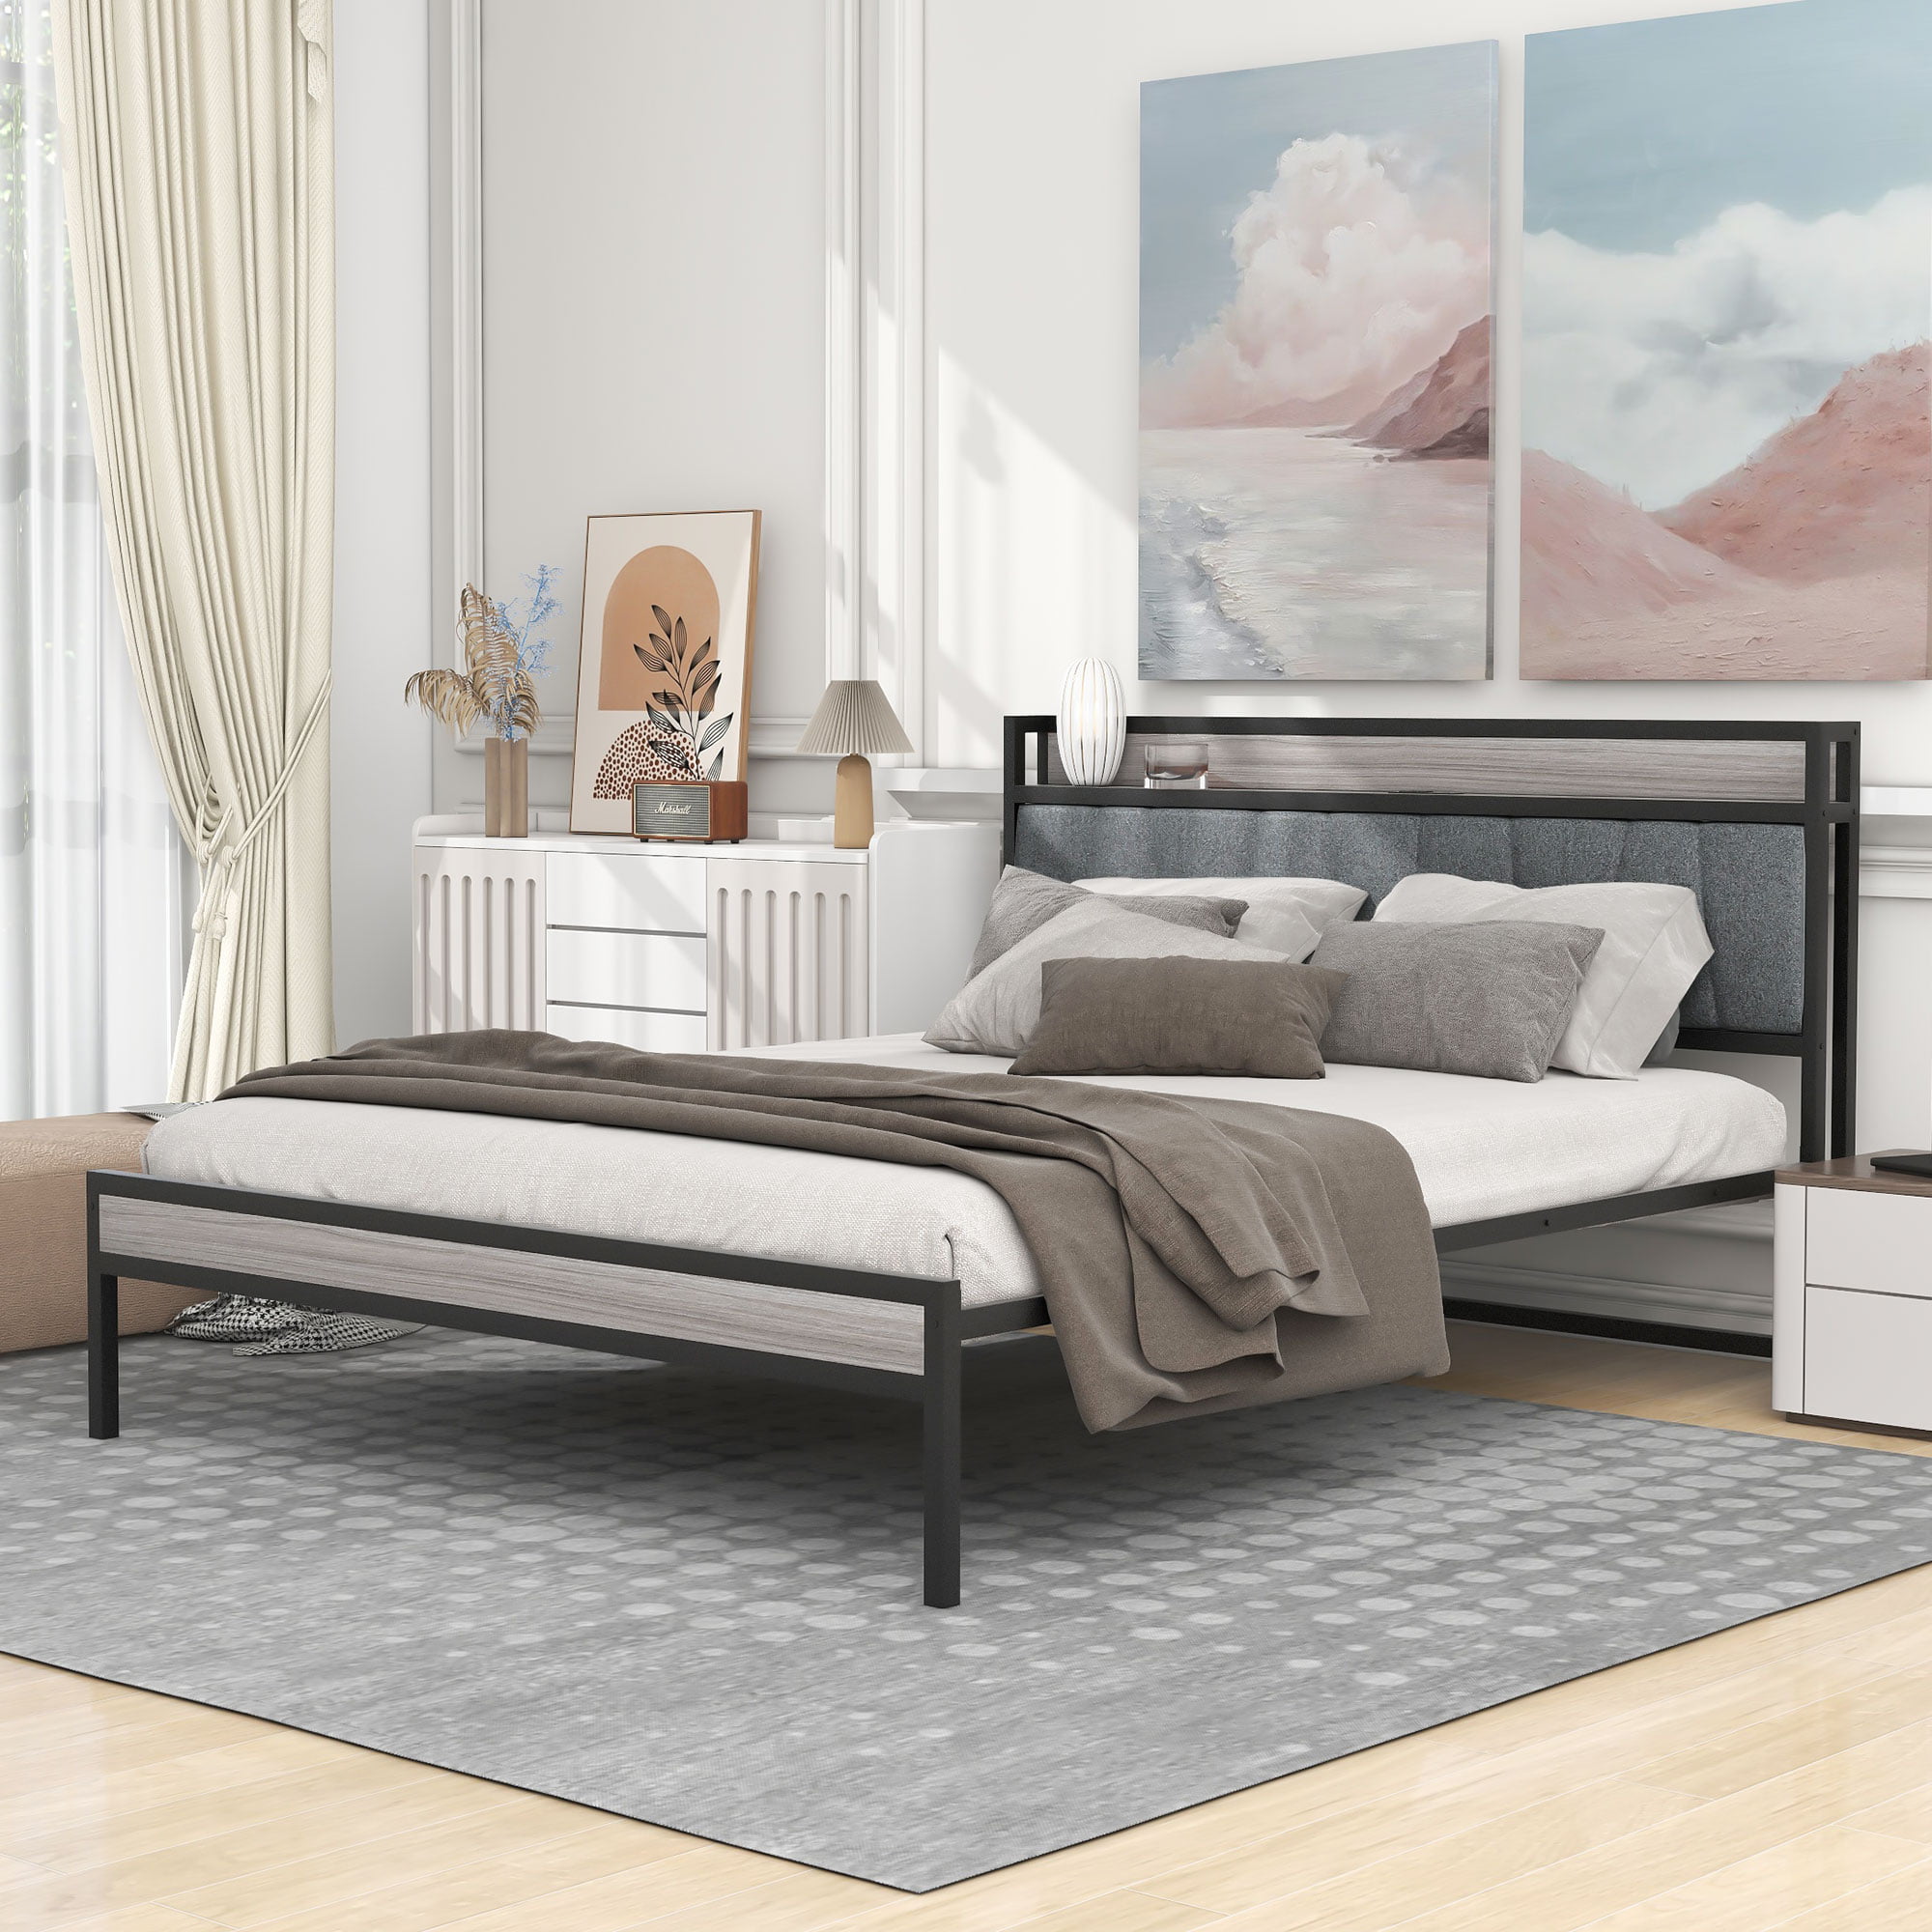 Queen Size Metal Platform Bed Frame With Upholstered Headboard Sockets, USB Ports And Slat Support